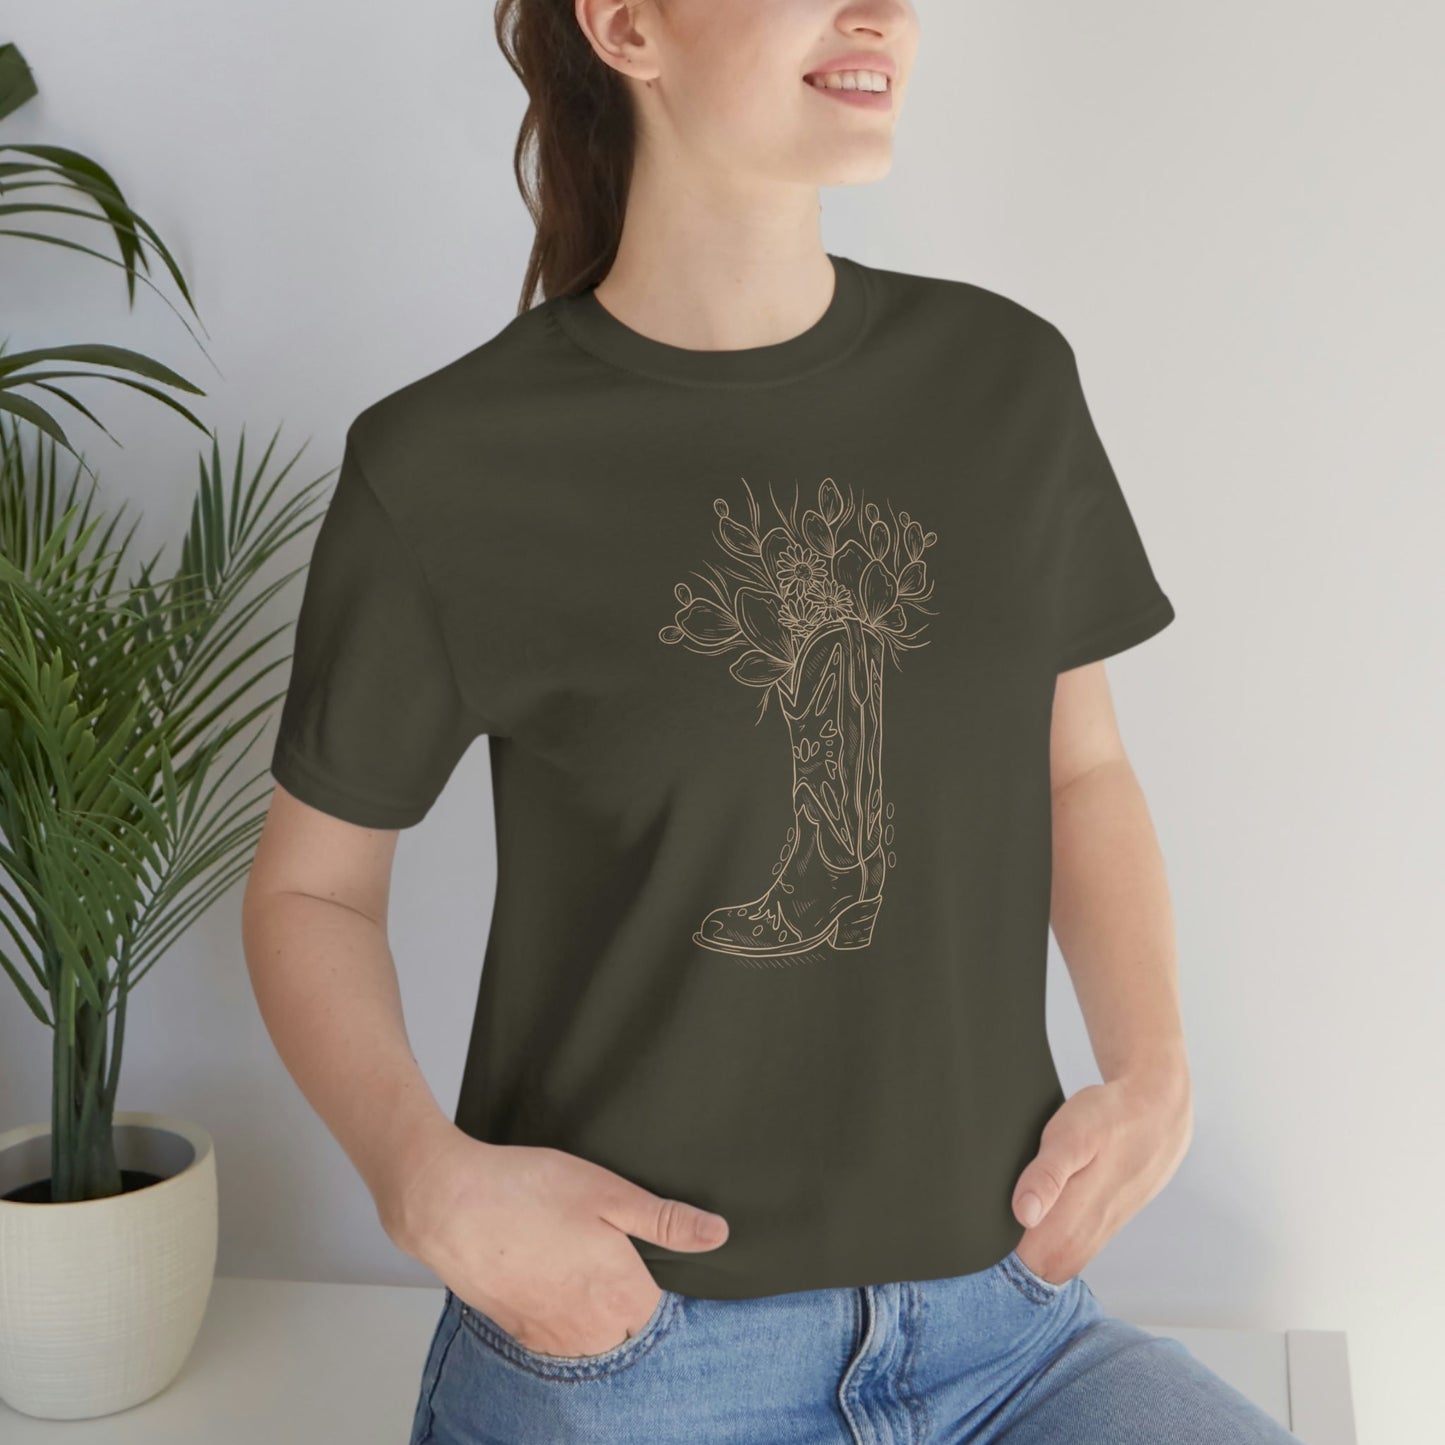 These Boots Outline Tee | Western Graphic Tee - Desert Darling Brand- Desert Darling Brand